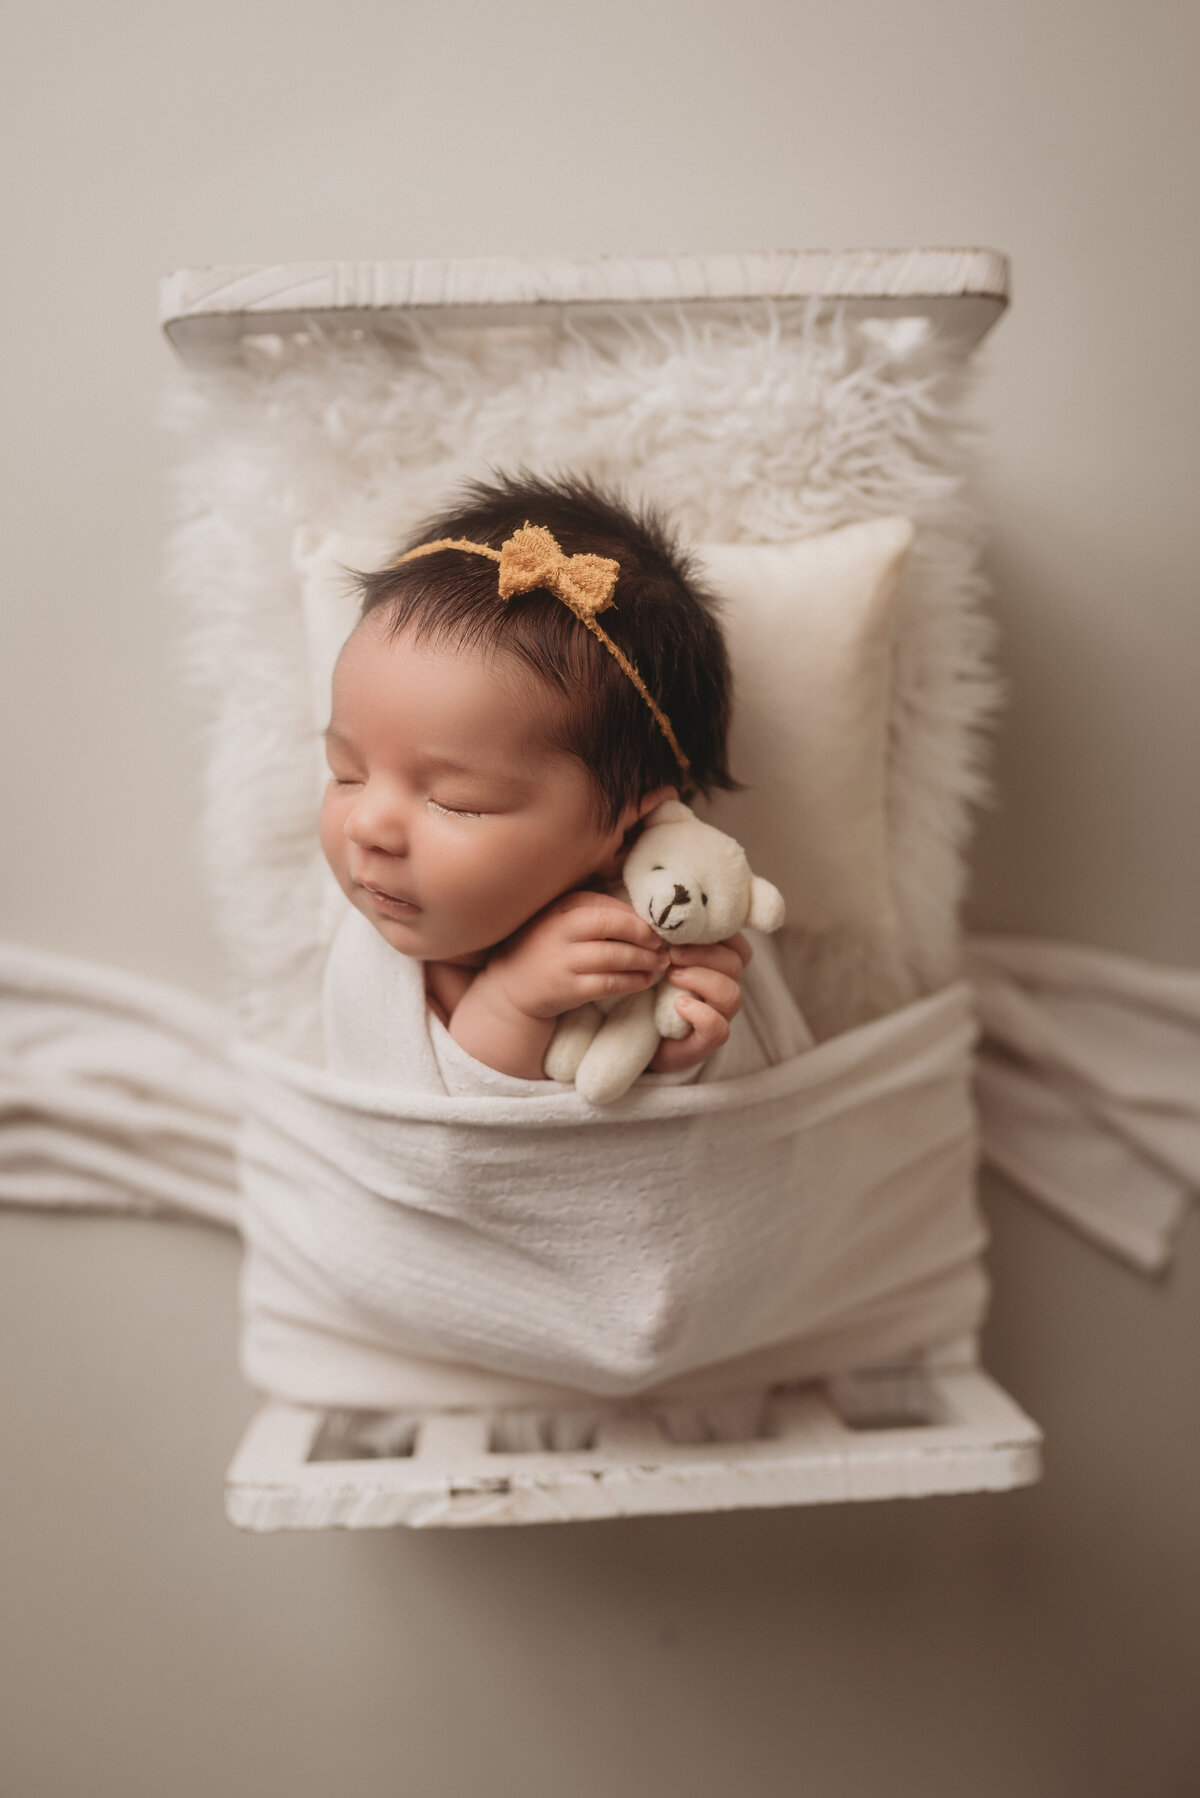 Baby girl, 2 weeks old, posing at Atlanta portrait studio for newborn portraits with little teddy bear in her hand